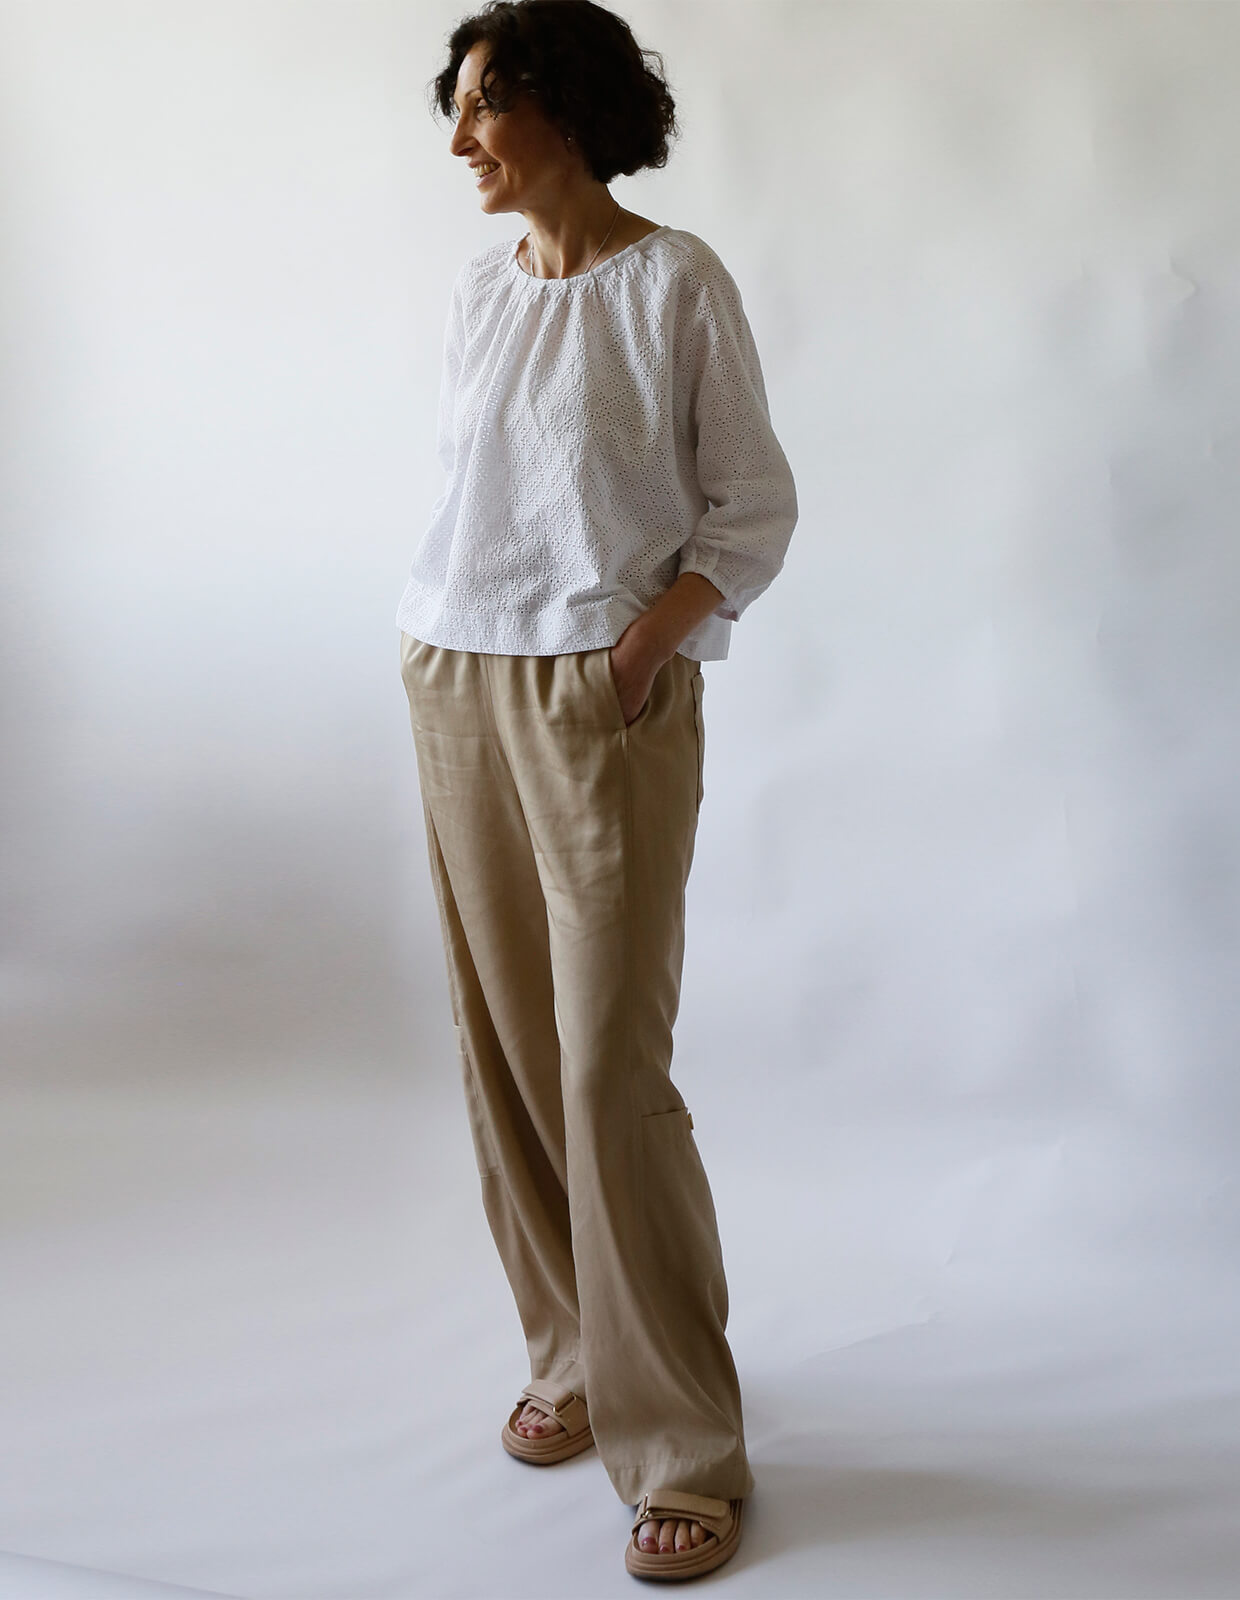 The Maker's Atelier Utility Pant and Skirt